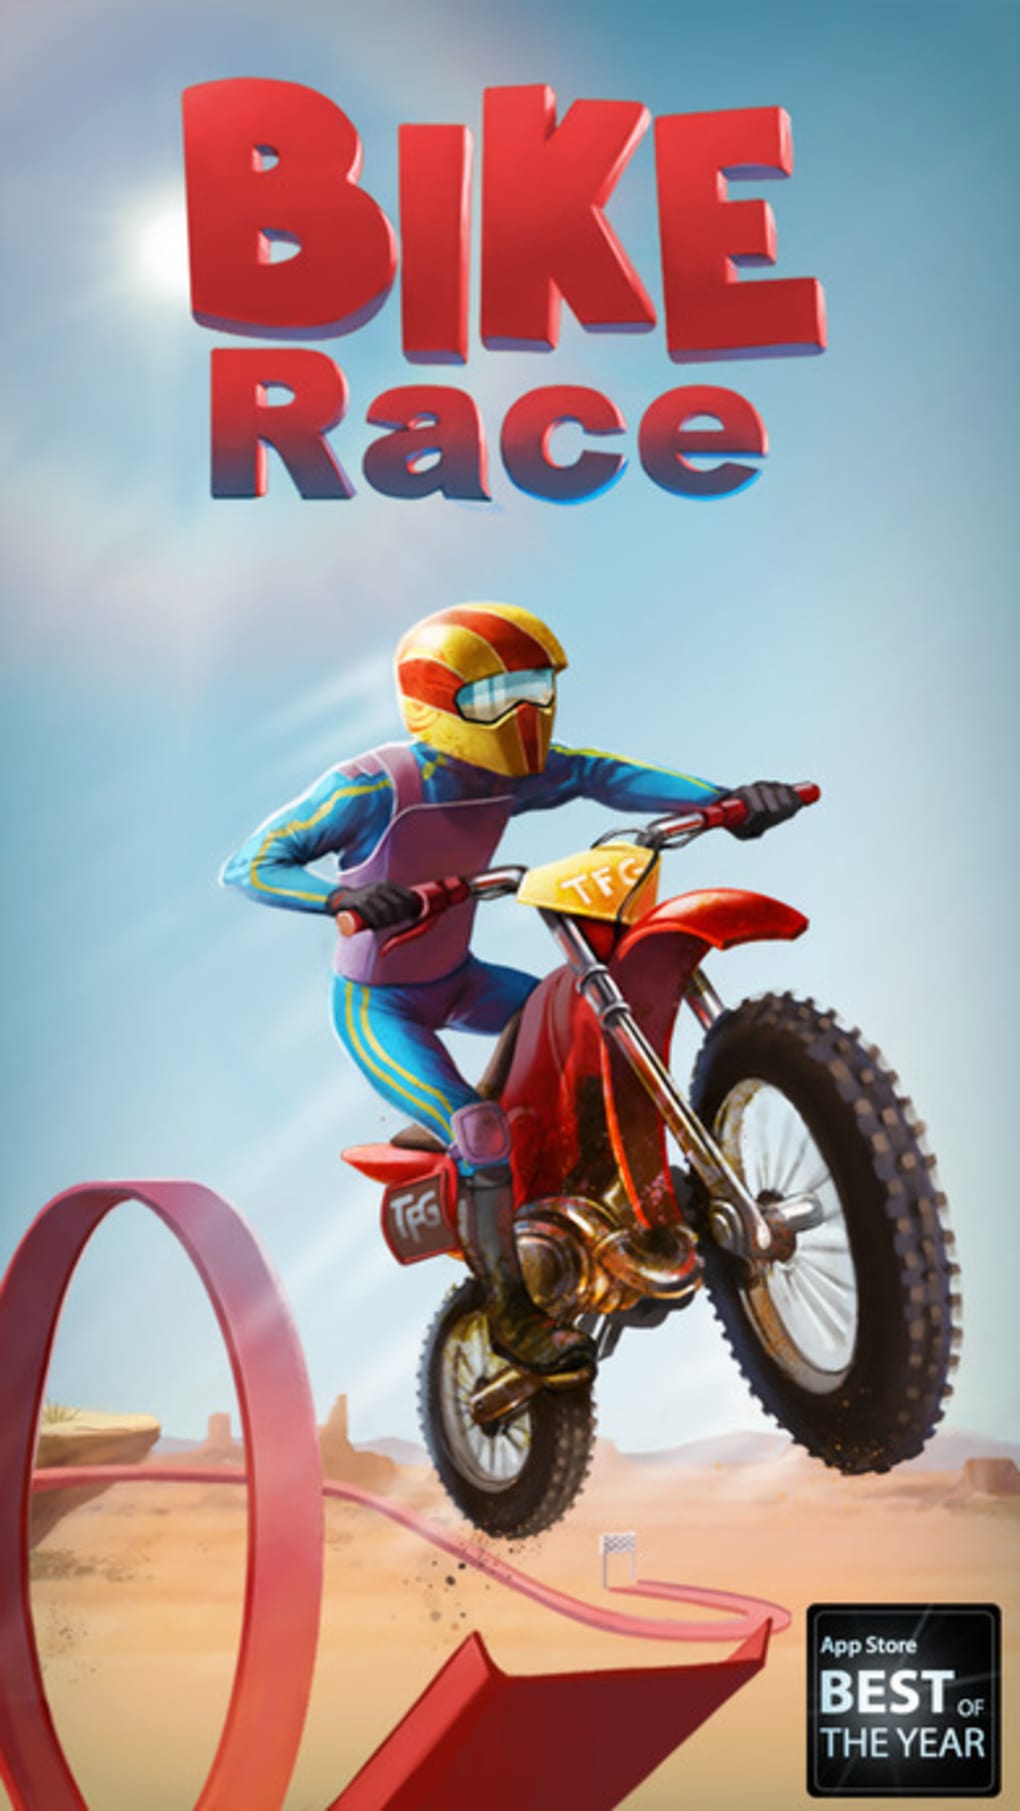 Bike Race Pro Top Motorcycle Racing Game for iPhone